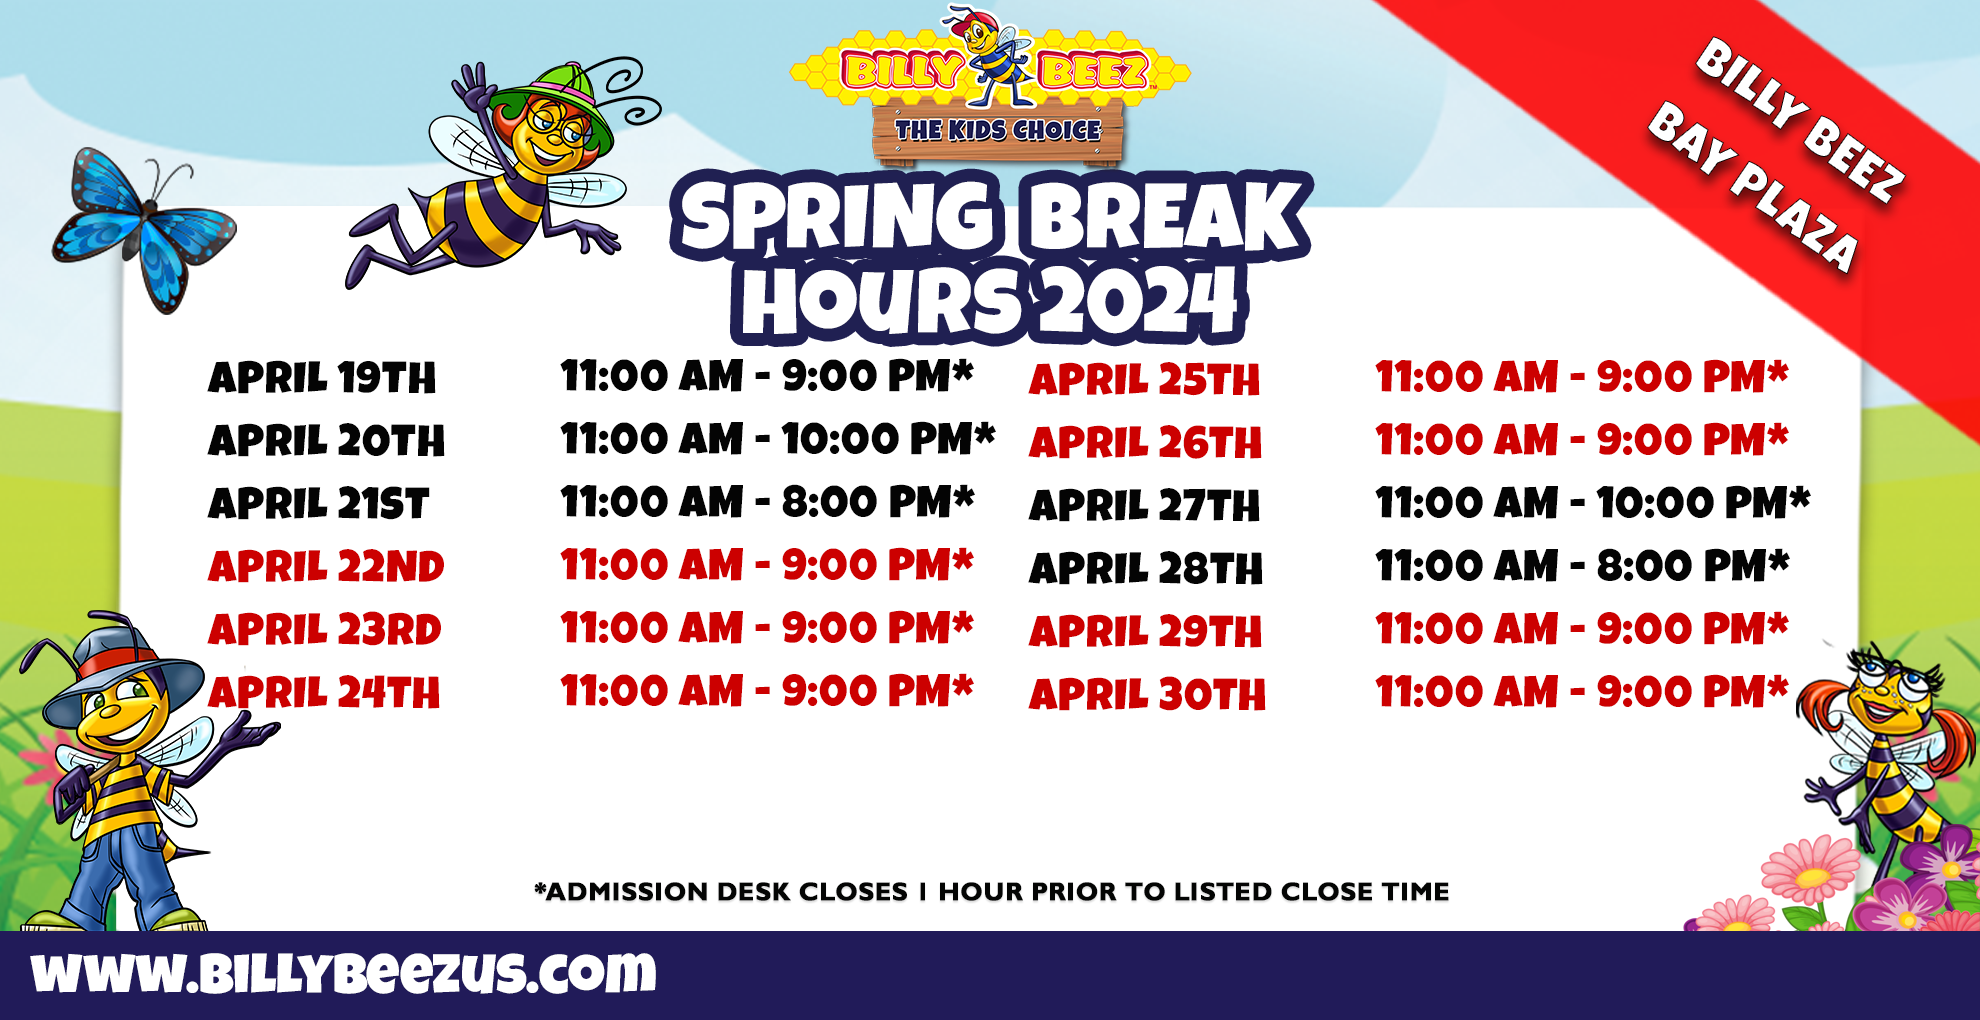 Billy Beez The Kids Place Billy Beez Bay Plaza SPring Break Hours 2024 April 19th 11:00am - 9:00am* April 20th 11:00am-10:00pm* April 21st 11:00am-8:00pm* April 22nd 11:00am-9:00pm* April 23rd 11:00am-9:00pm* April 24th 11:00am-9:00pm* April 25th 11:00am-9:00pm* April 26th 11:00am-9:00pm* April 27th 11:00am-10:00pm* April 28th 11:00am-8:00pm* April 29th 11:00am-9:00pm* April 30th 11:00am-9:00pm* *Admission desk closes 1 hour prior to listed close time